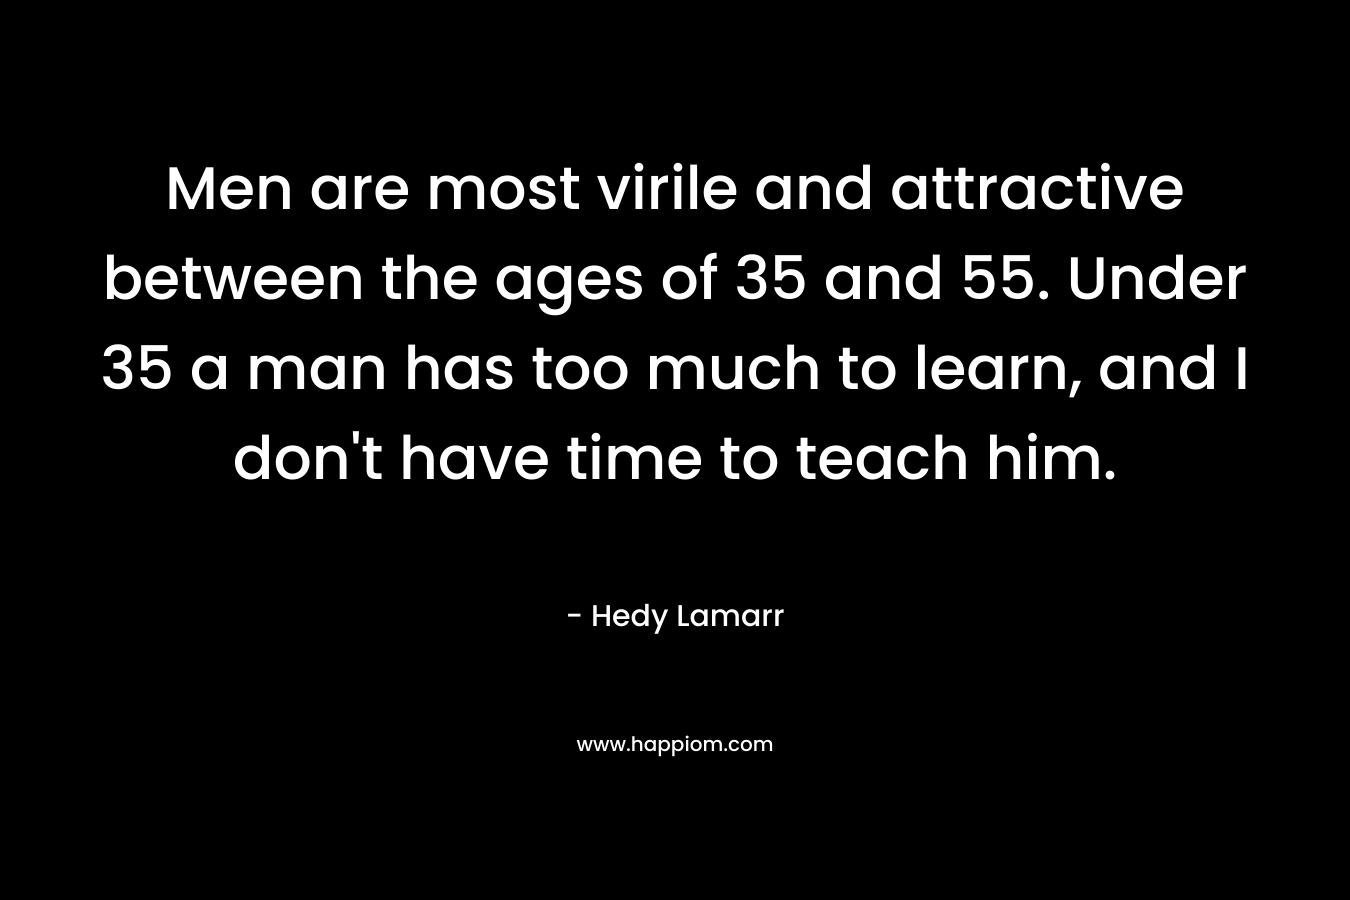 Men are most virile and attractive between the ages of 35 and 55. Under 35 a man has too much to learn, and I don’t have time to teach him. – Hedy Lamarr